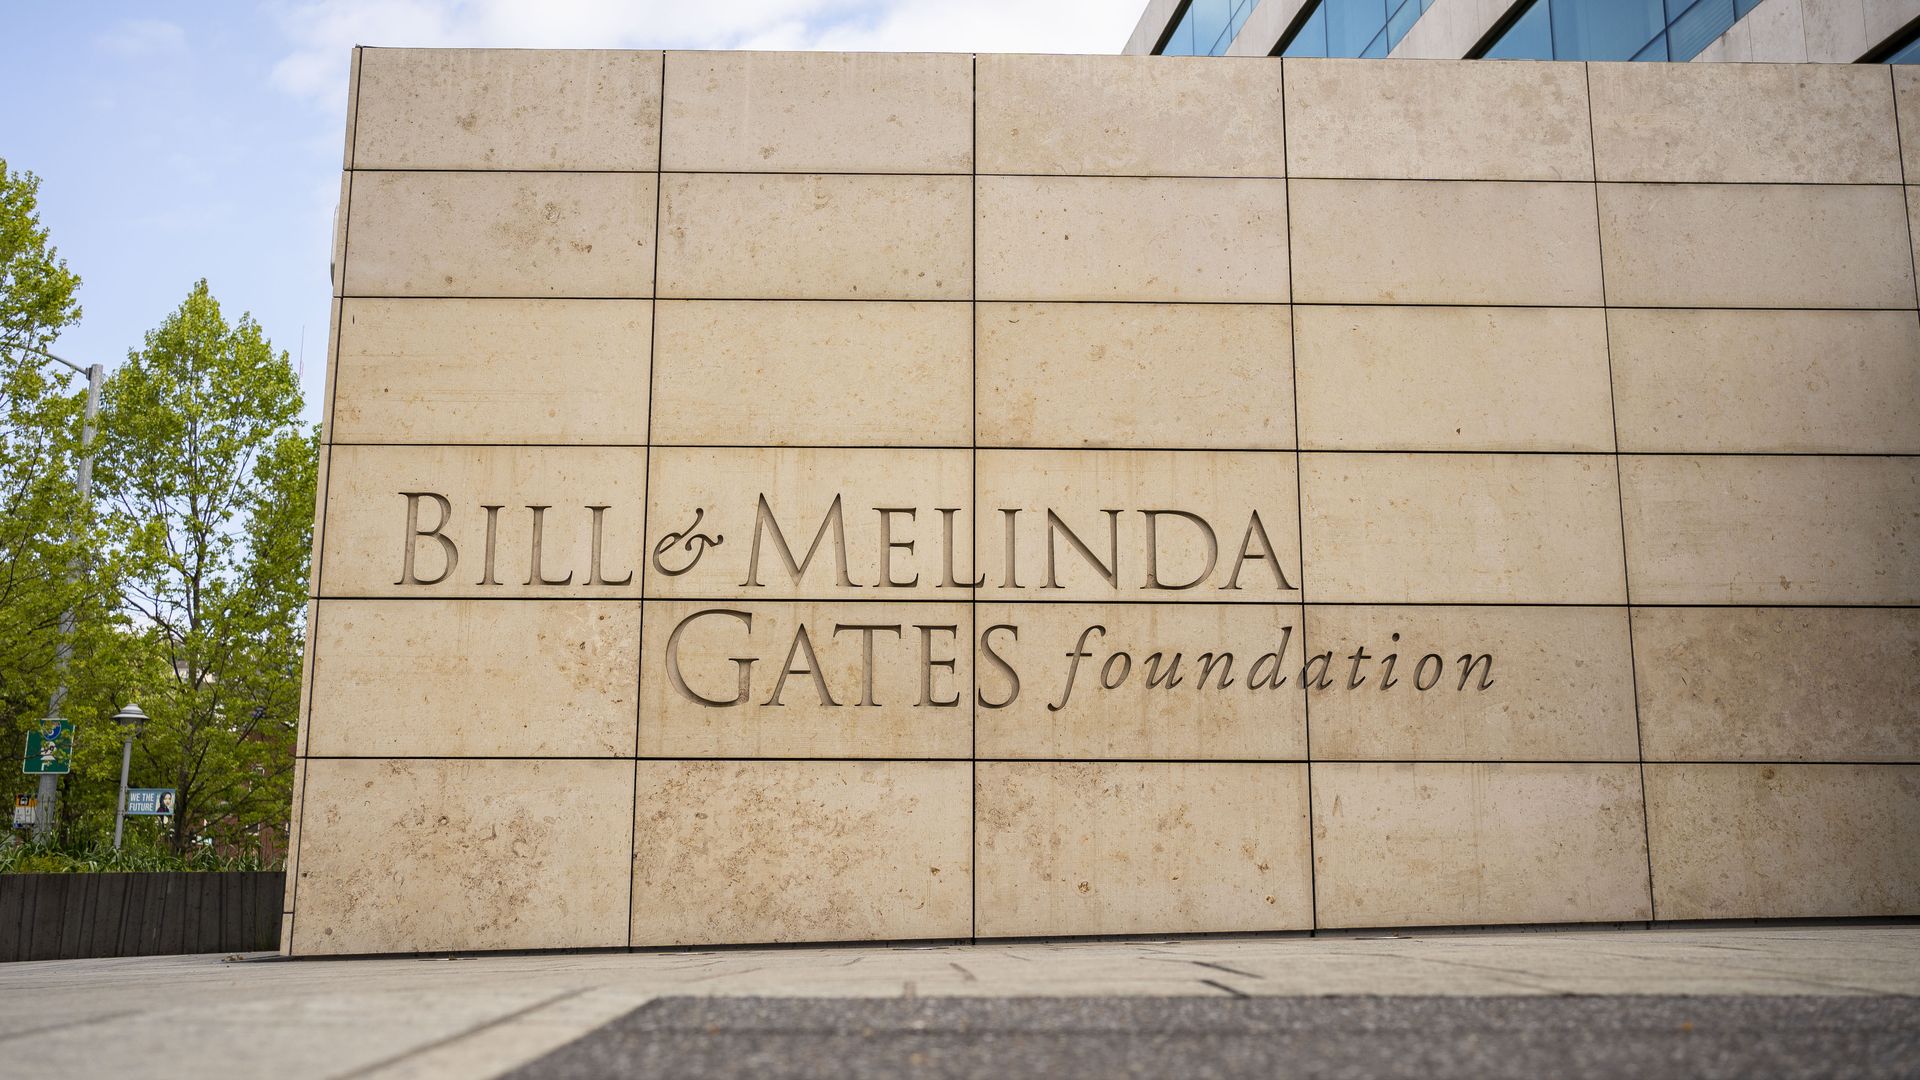 The exterior of the Bill and Melinda Gates Foundation.